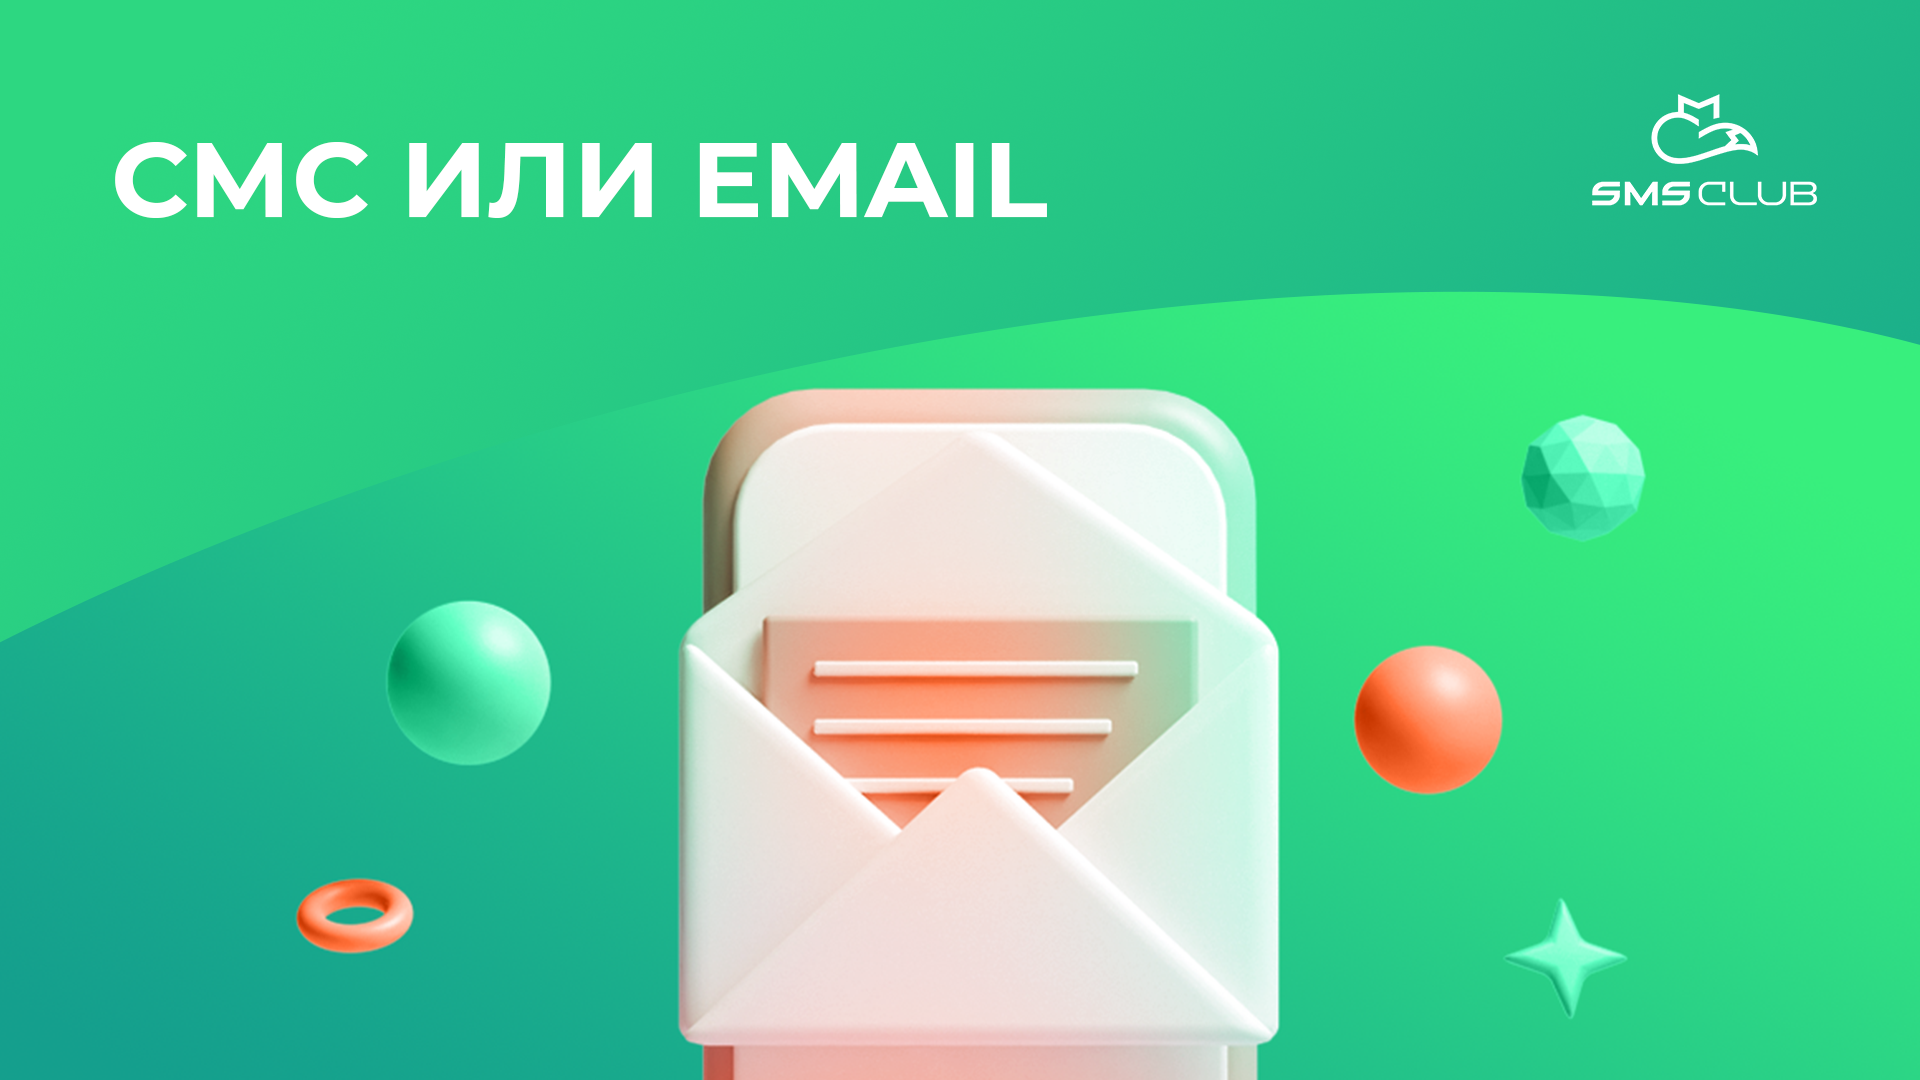 SMS and email